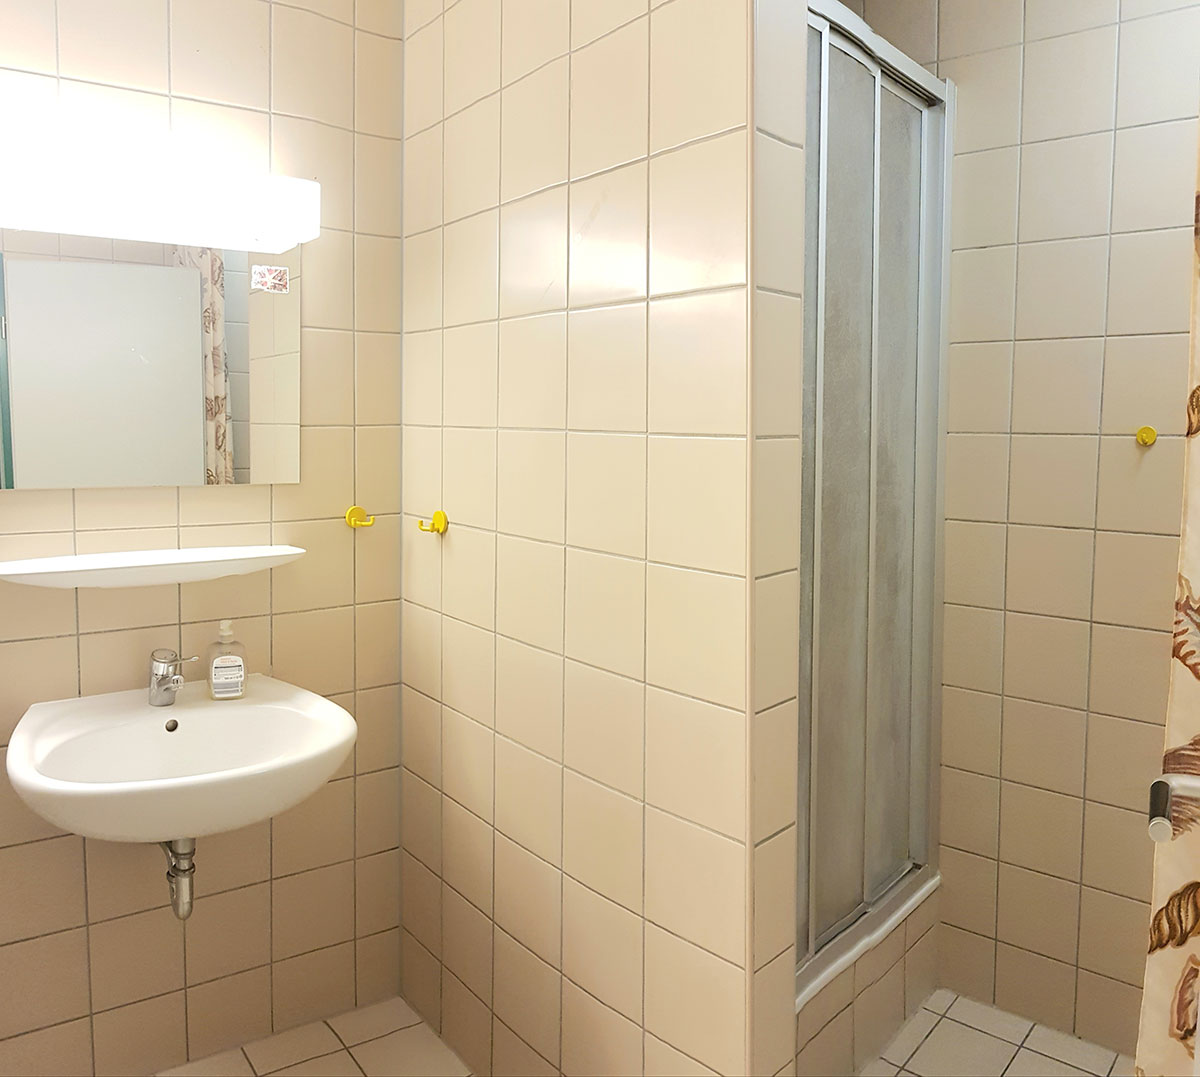 Bathroom in the residence hall